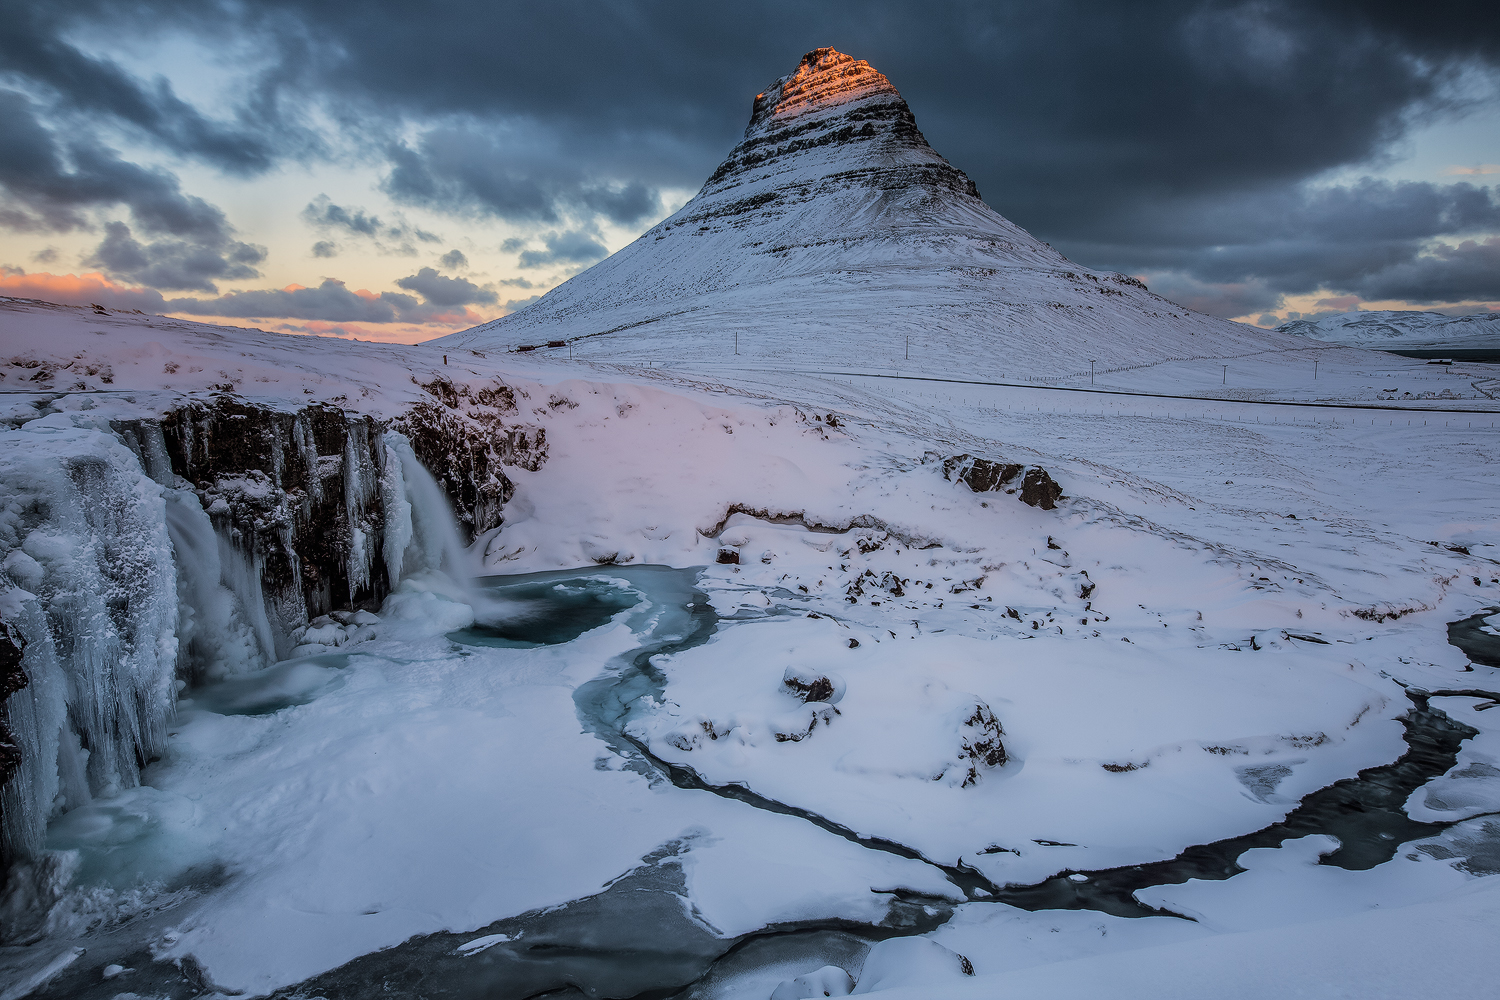 Kirkjufell is known to be Iceland's most photographed mountain.